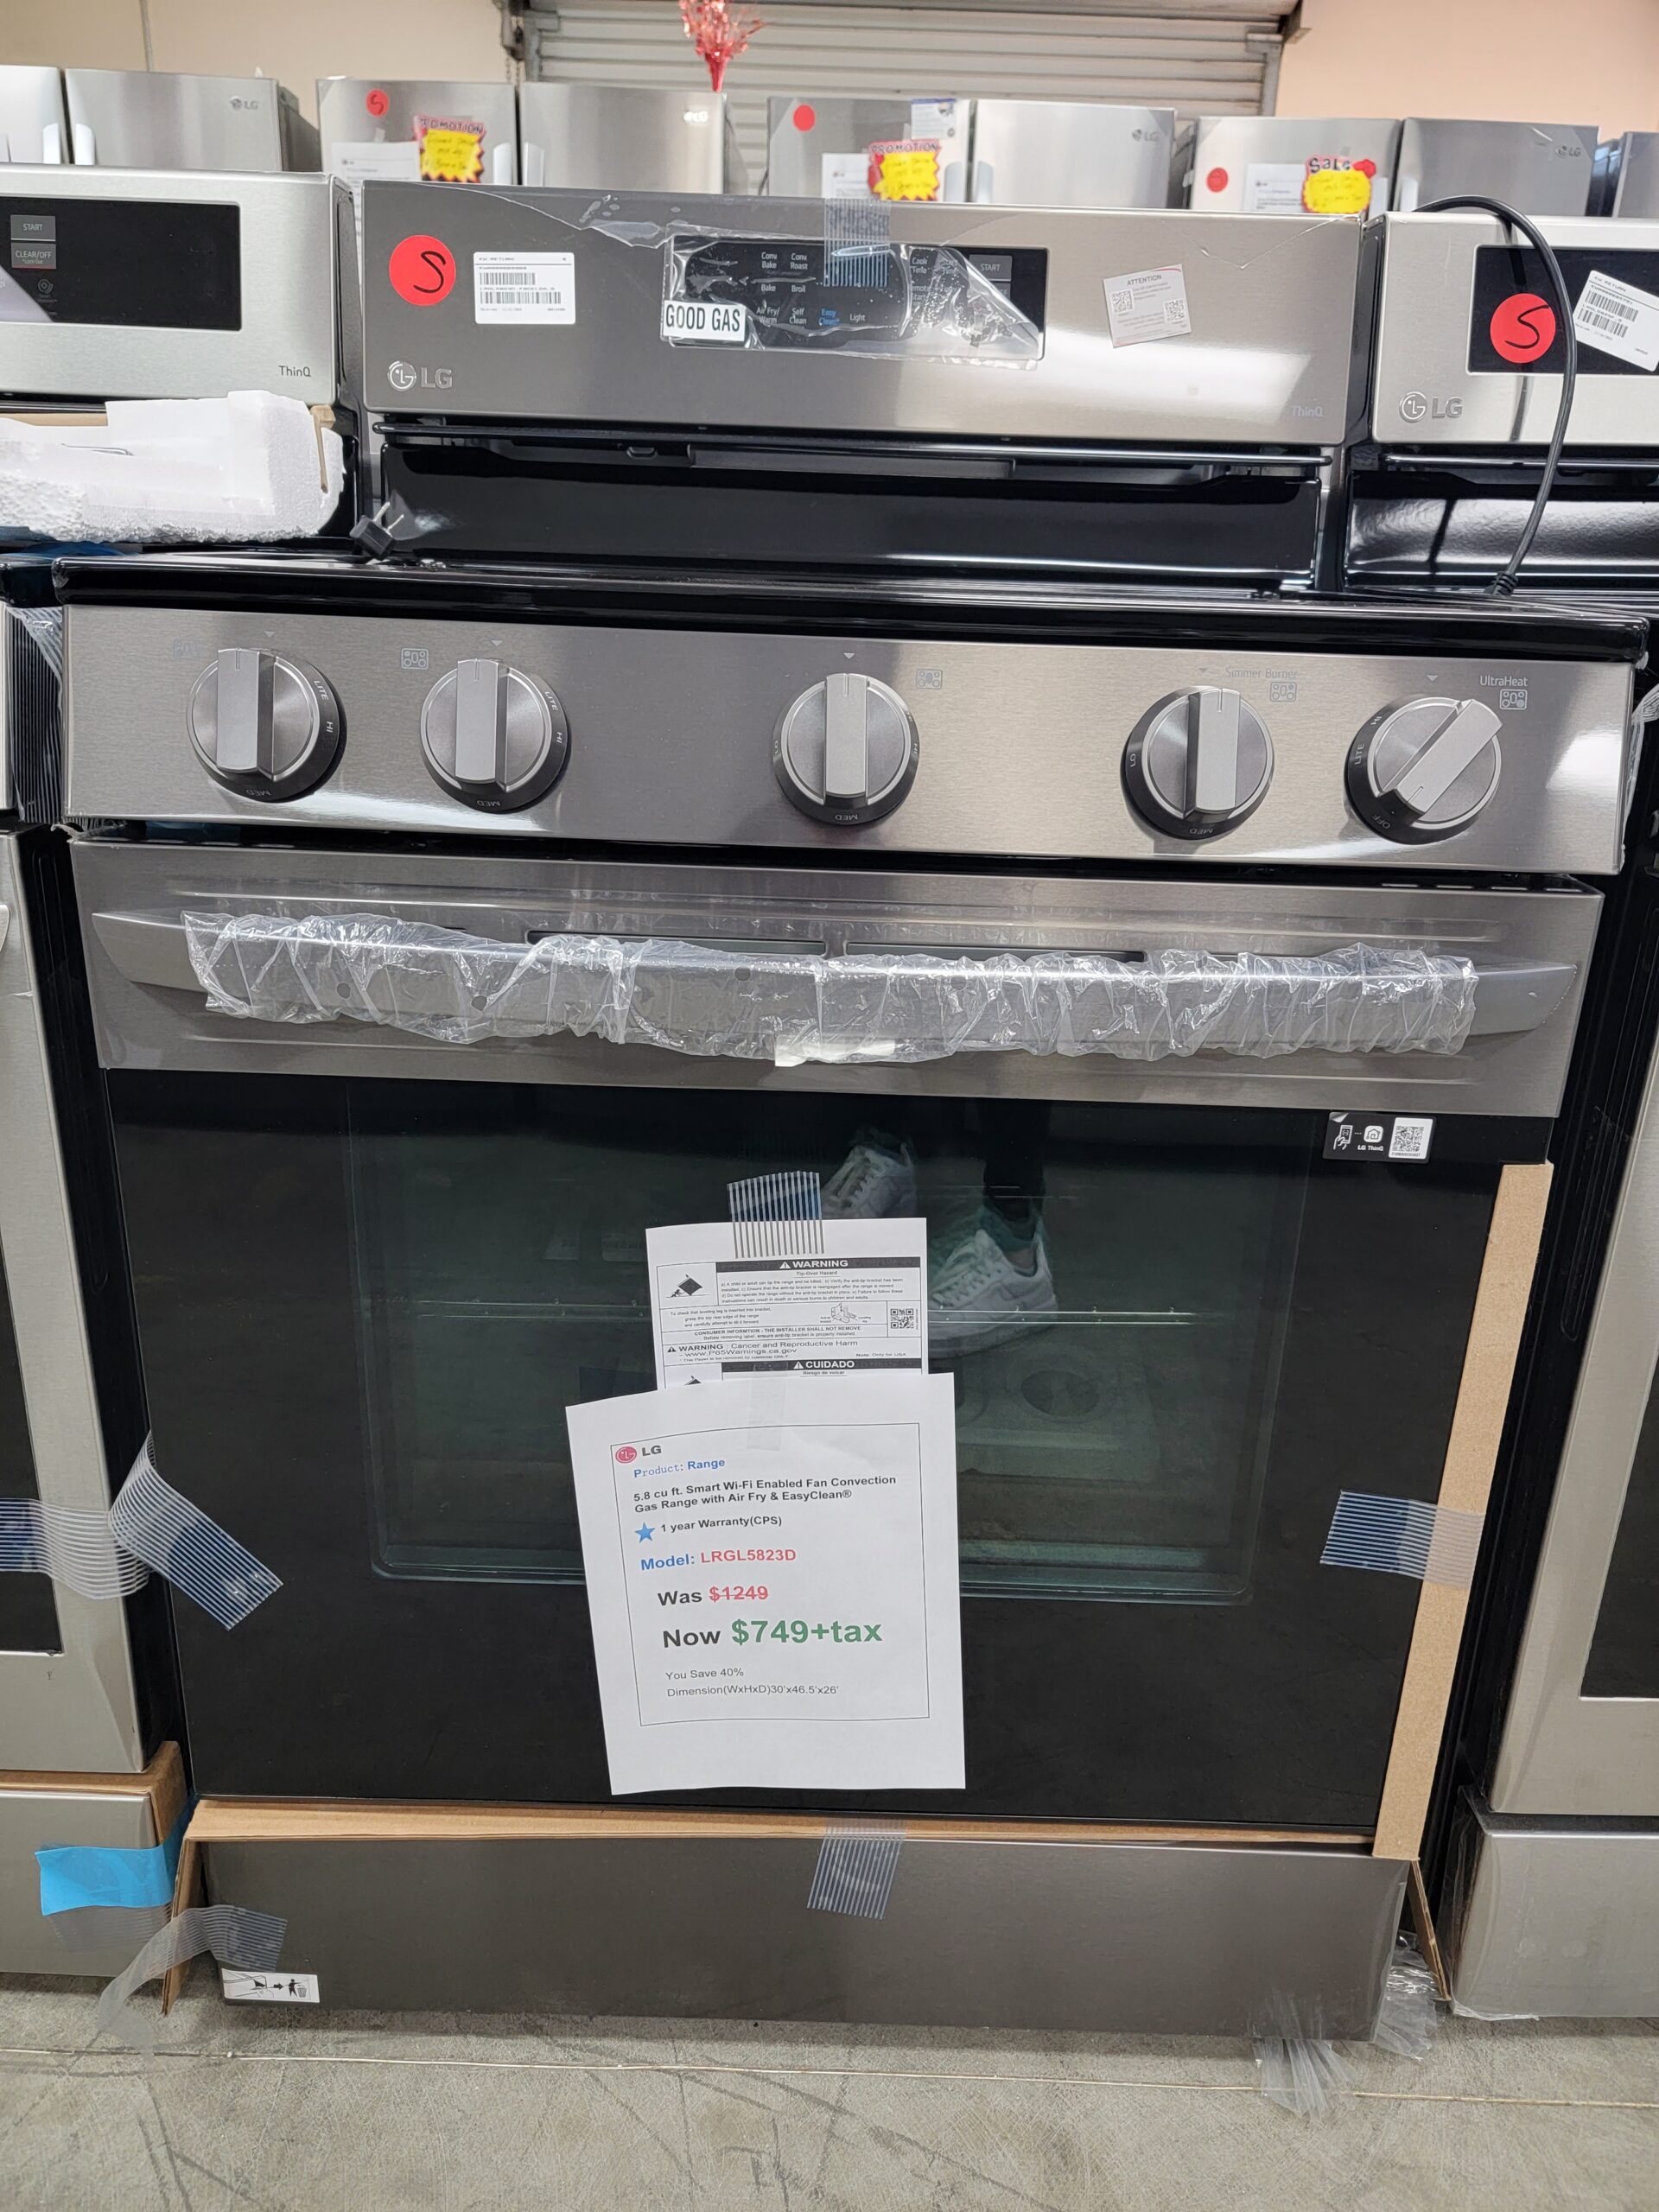 LG Gas Range with Air Fry & EasyClean - LRGL5823S